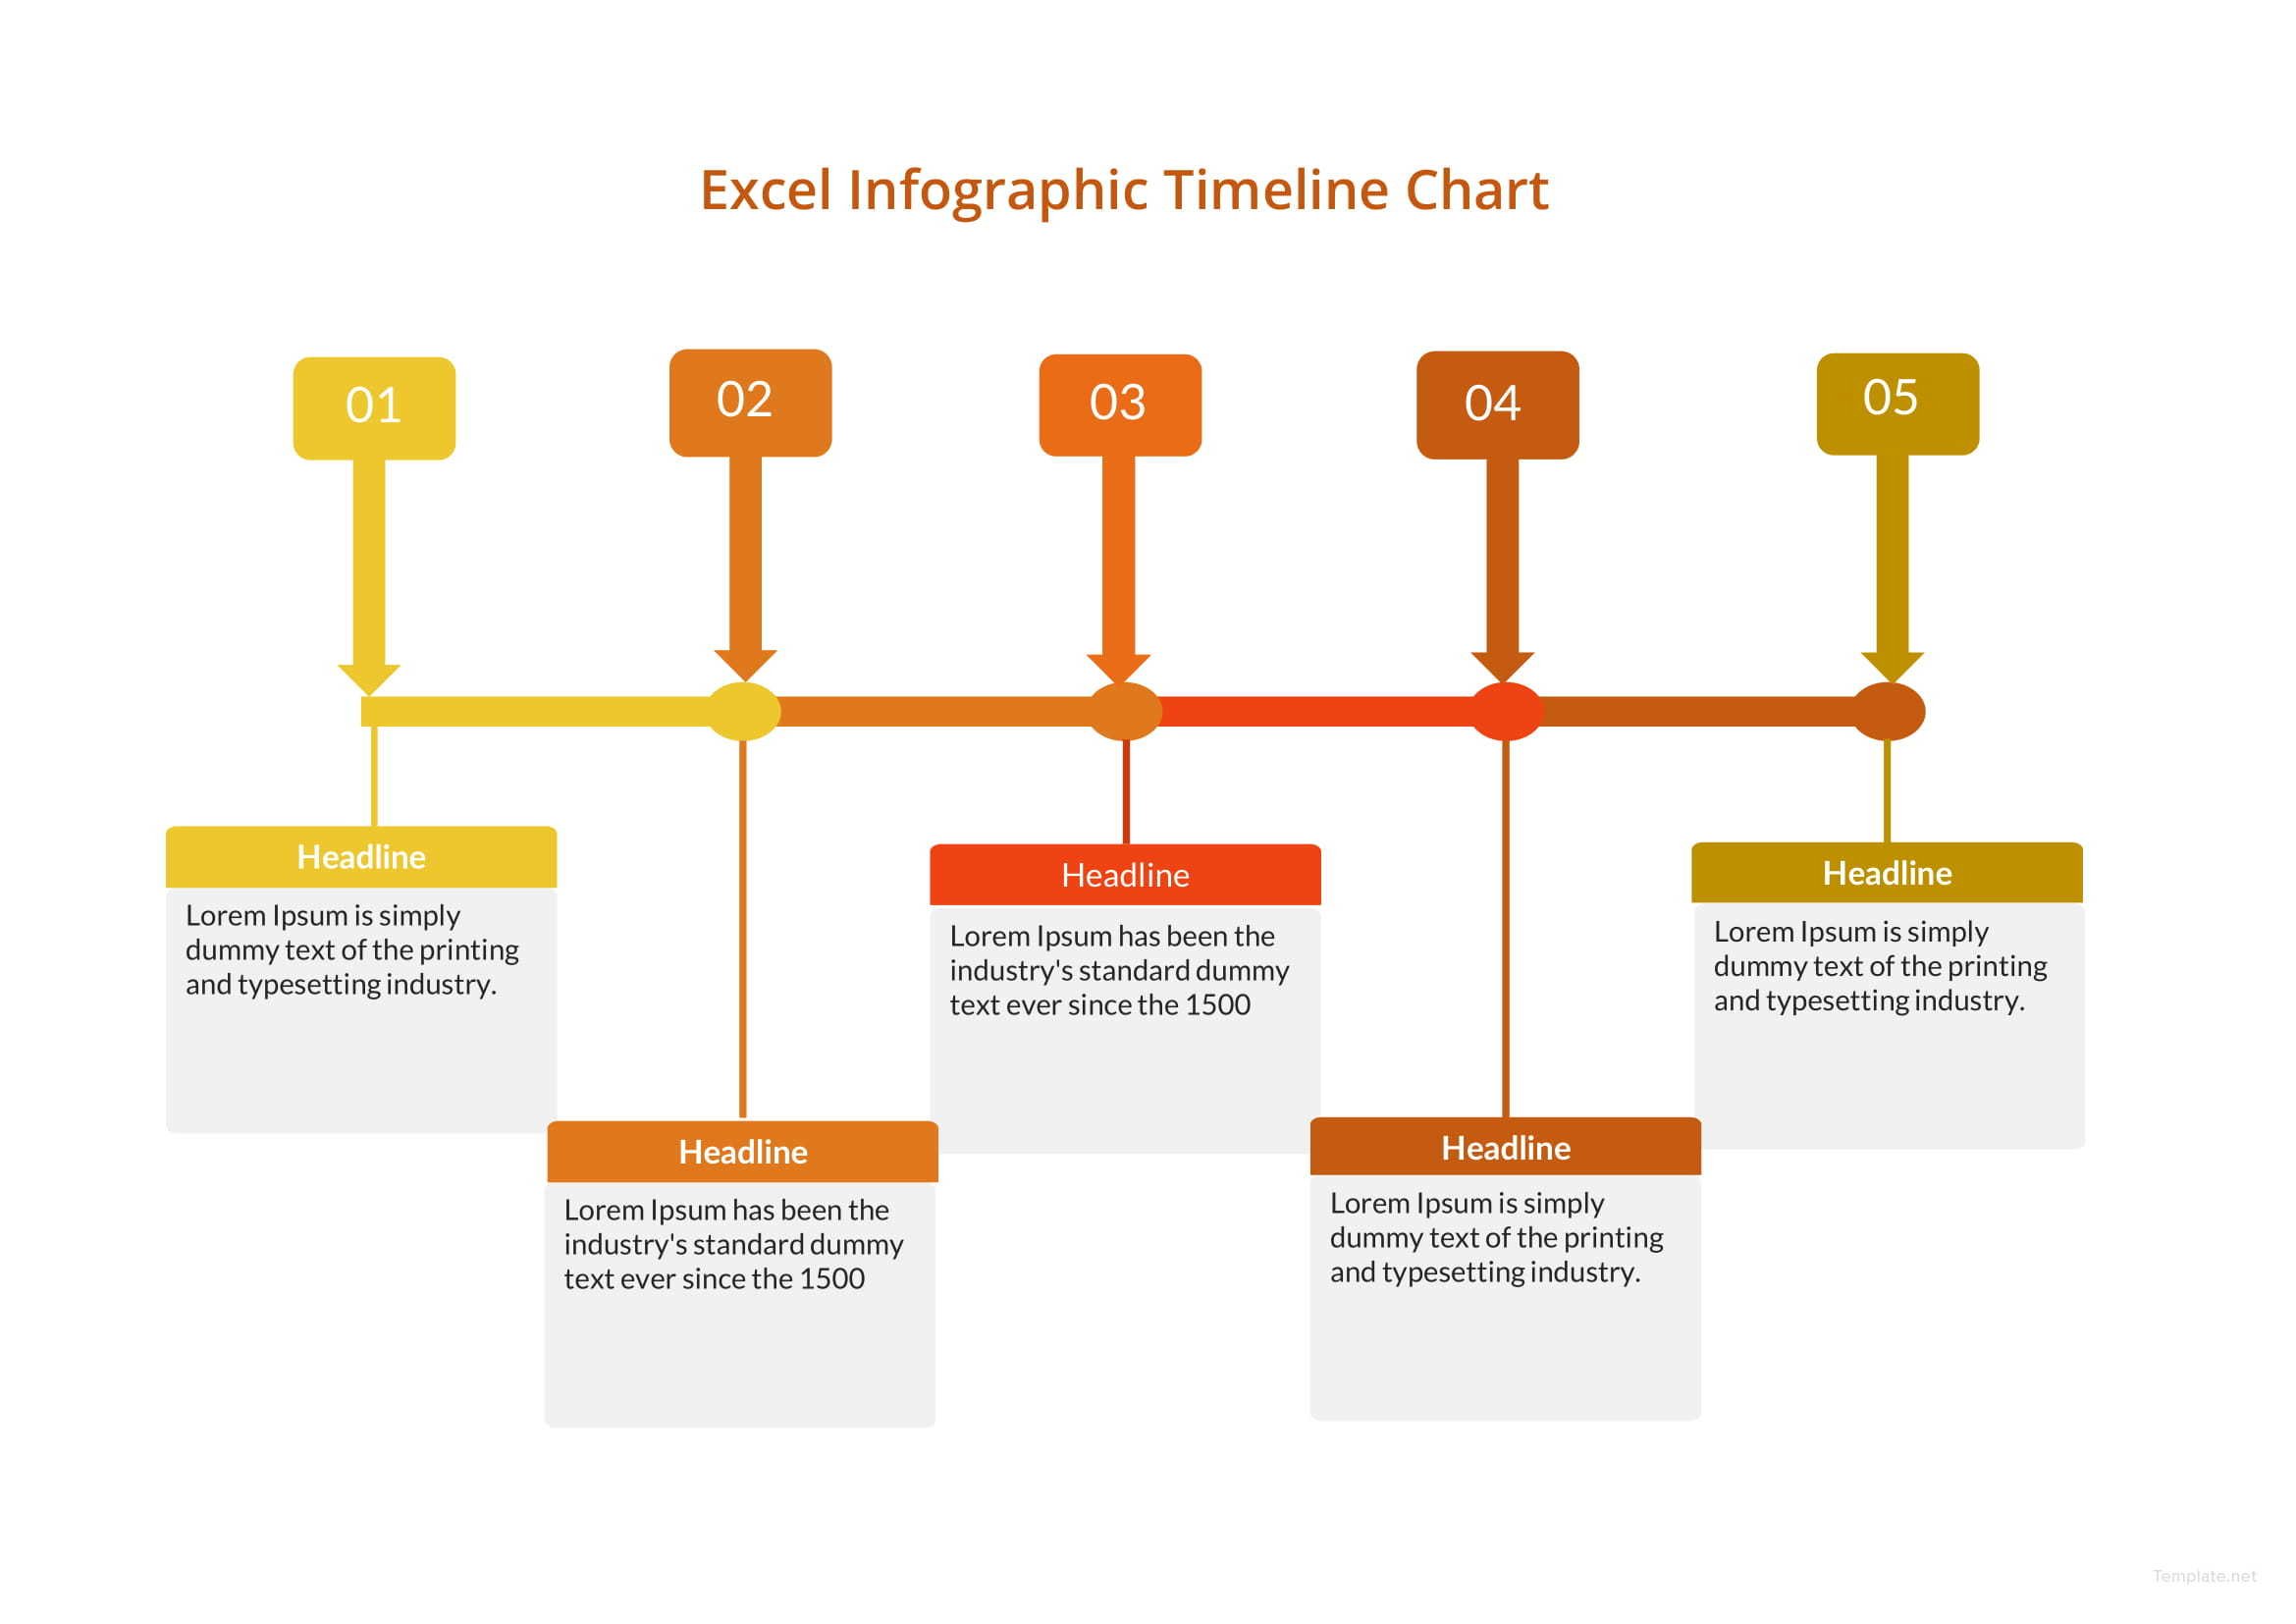 timeline-infographic-chart-template-in-microsoft-word-excel-template